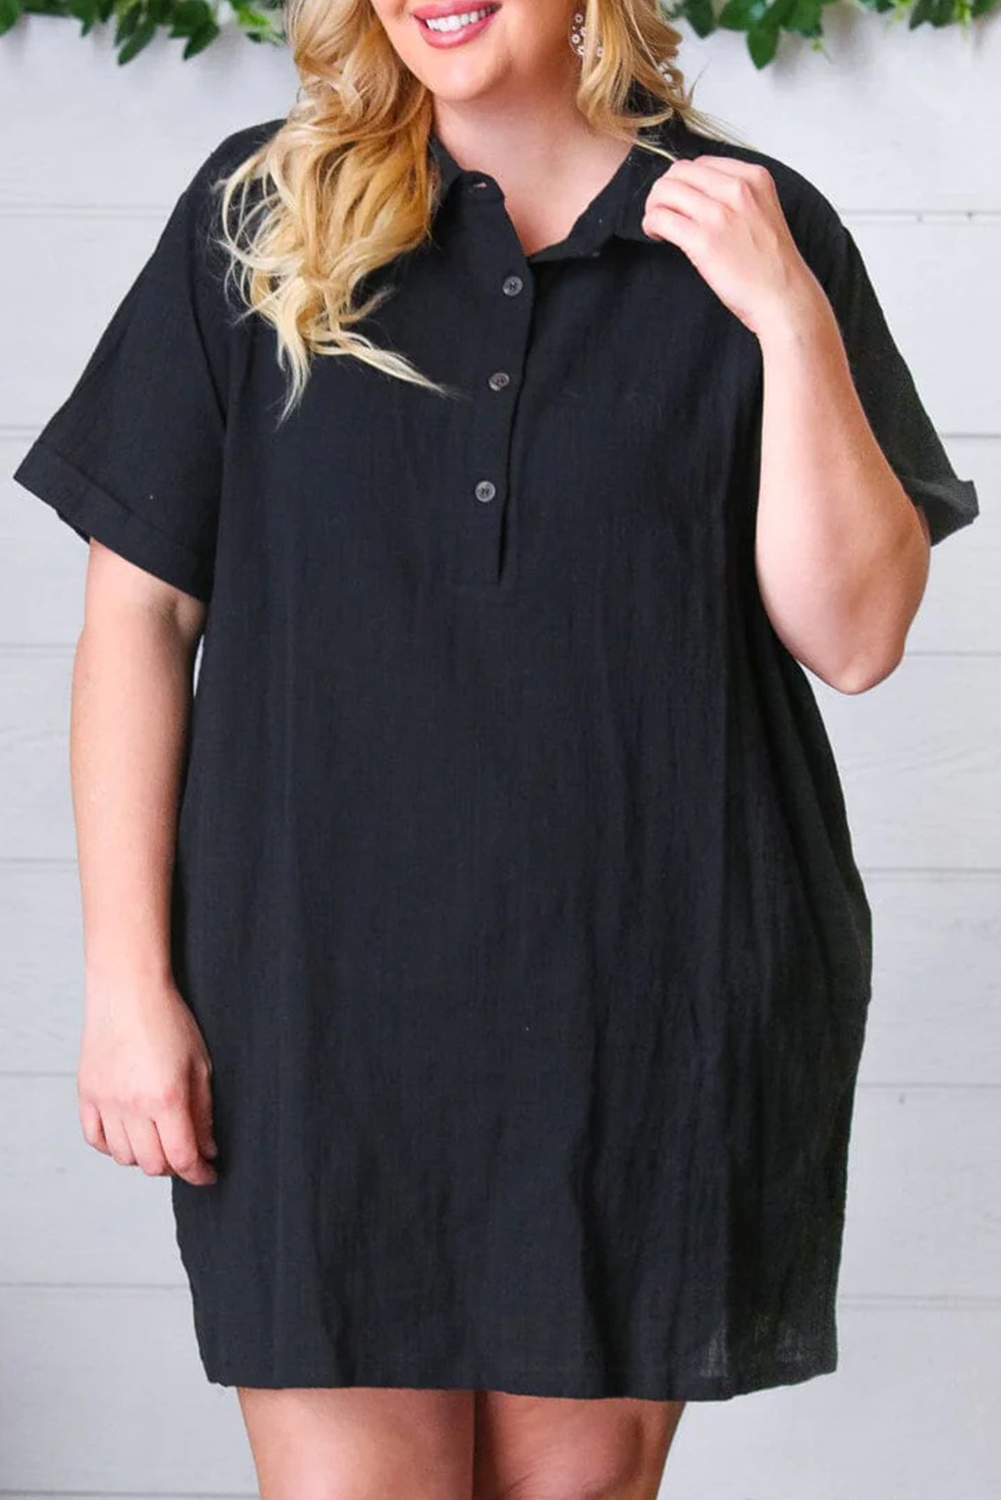 Shewin Wholesale Dropshippers Black Plus Size Collar Buttoned Short Sleeve Shirt DRESS